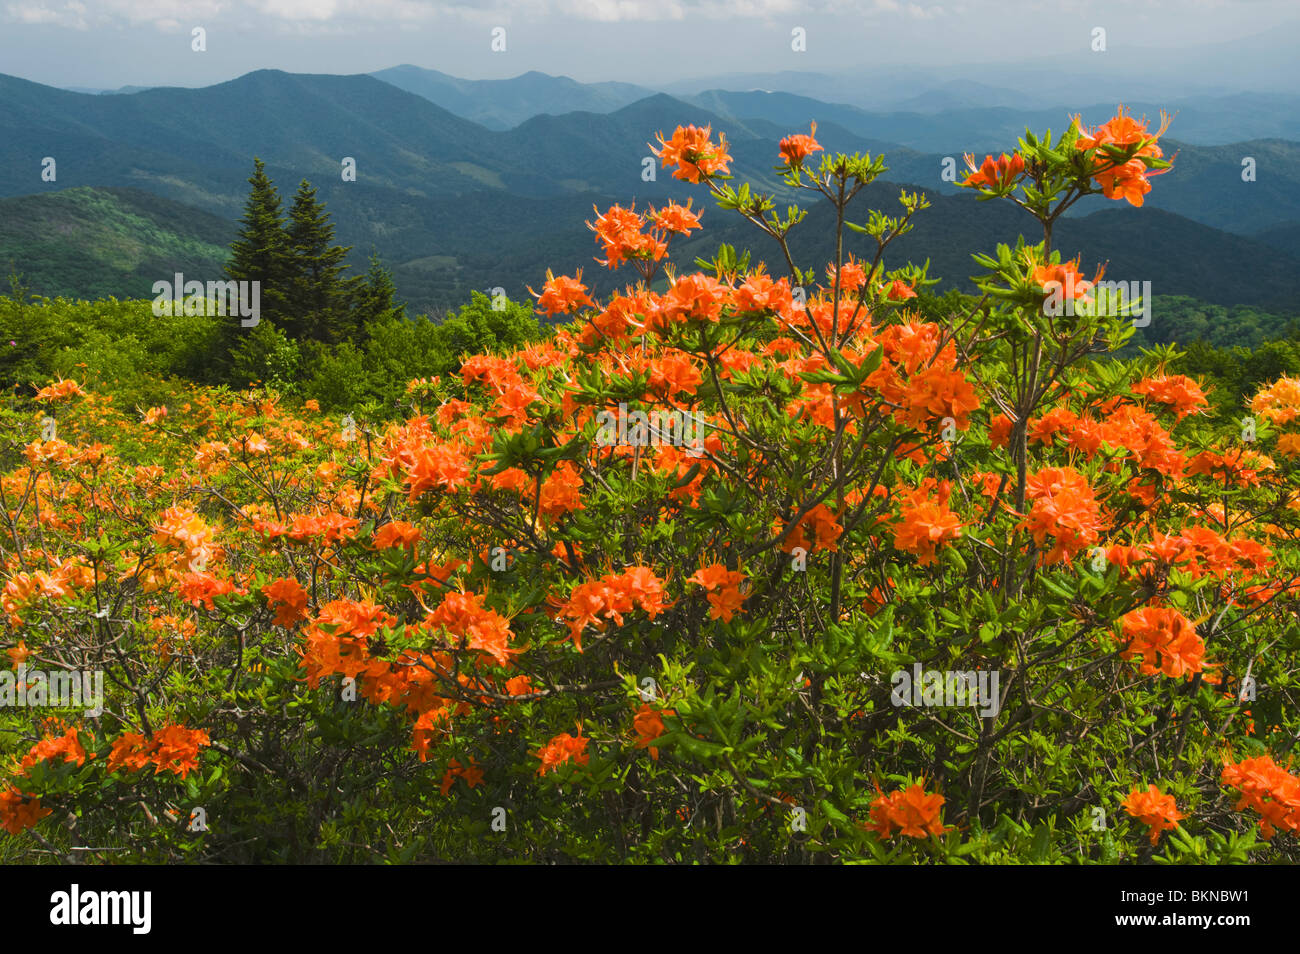 North Carolina, United States Of America; Flame Azalea (Rhododendron Calendulaceum) Blooms On The Health Balds Of Roan Mountain Stock Photo